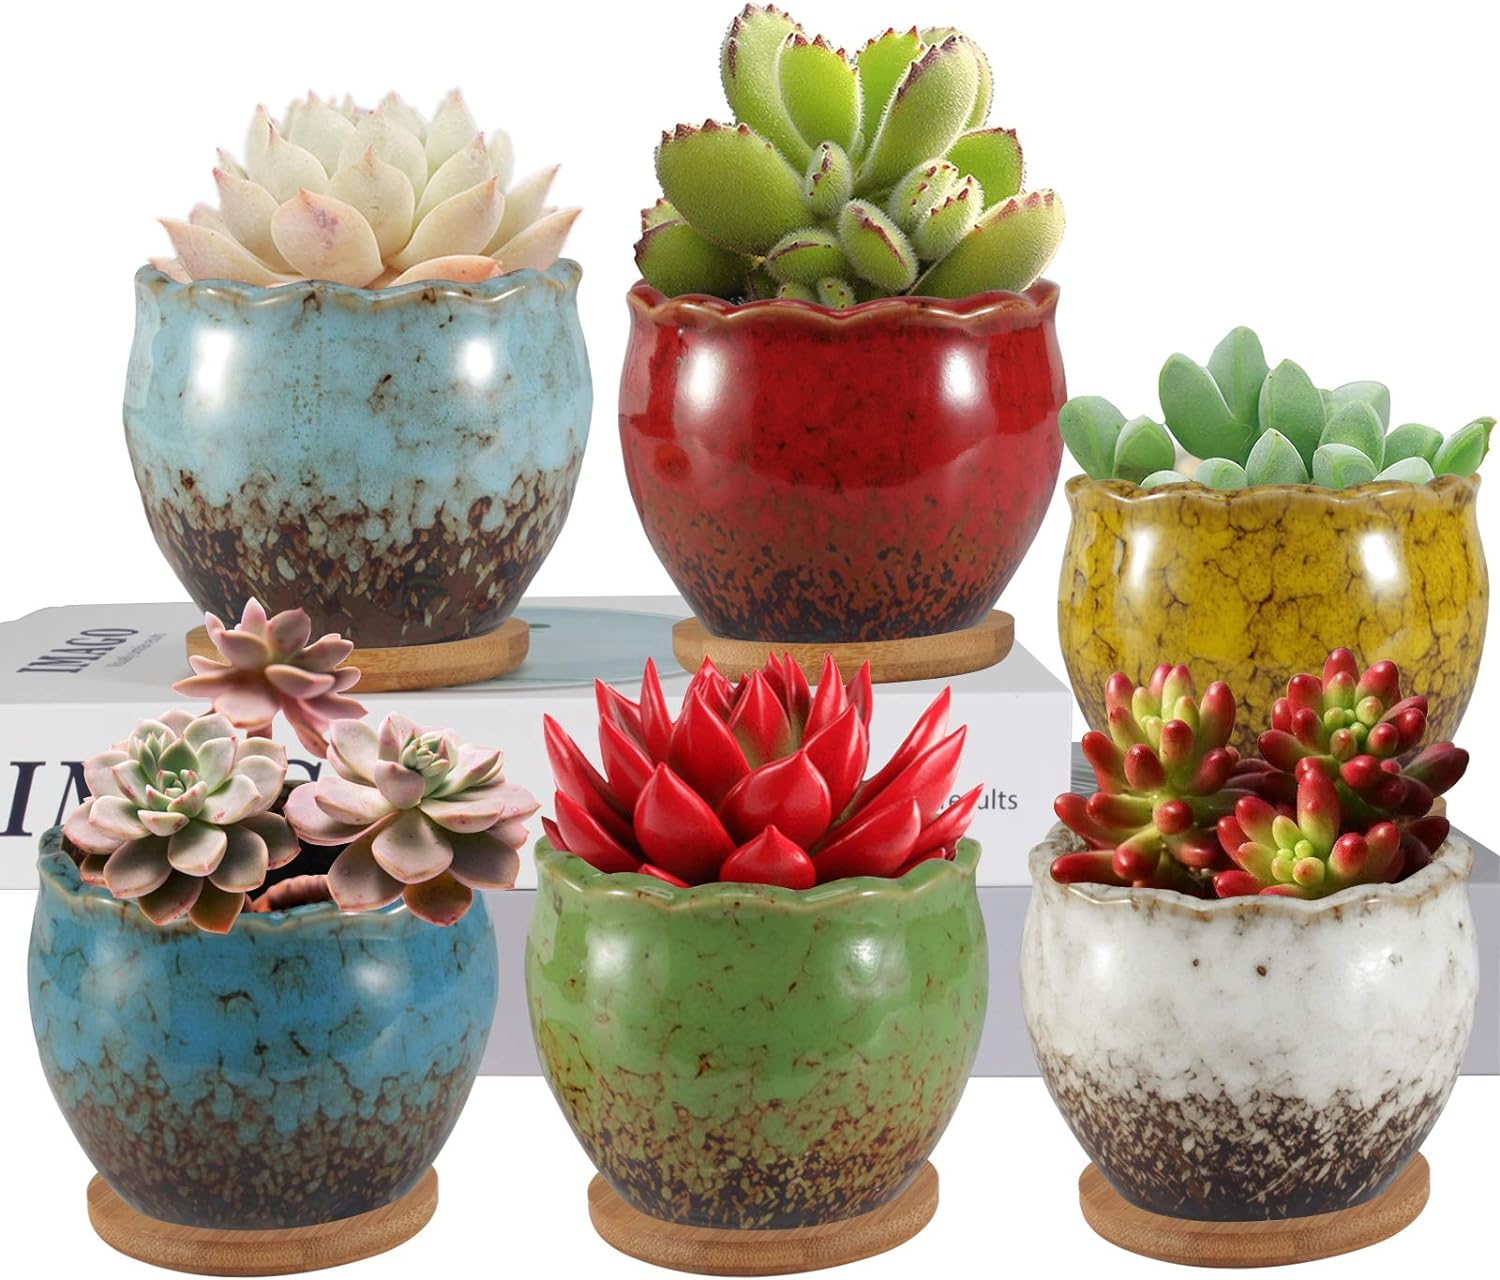 ZOUTOG Succulent Pots, 4 inch Colorful Ceramic Flower Pots, Succulent Planter with Drainage Hole and Bamboo Plant Saucers